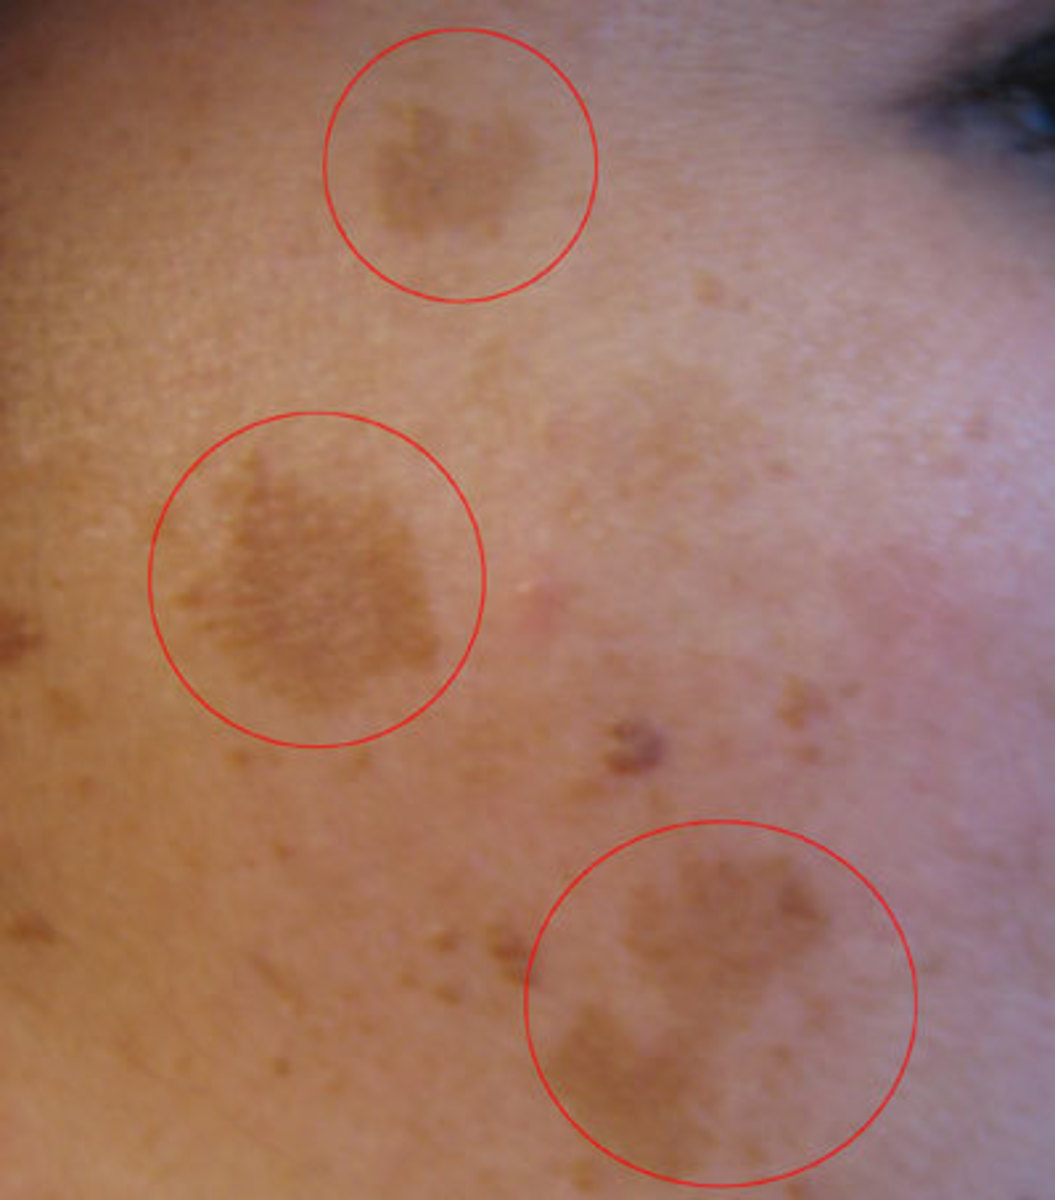 A case of Melasma, a particularly common affliction in women taking oral contraceptives or hormone replacement therapy. 